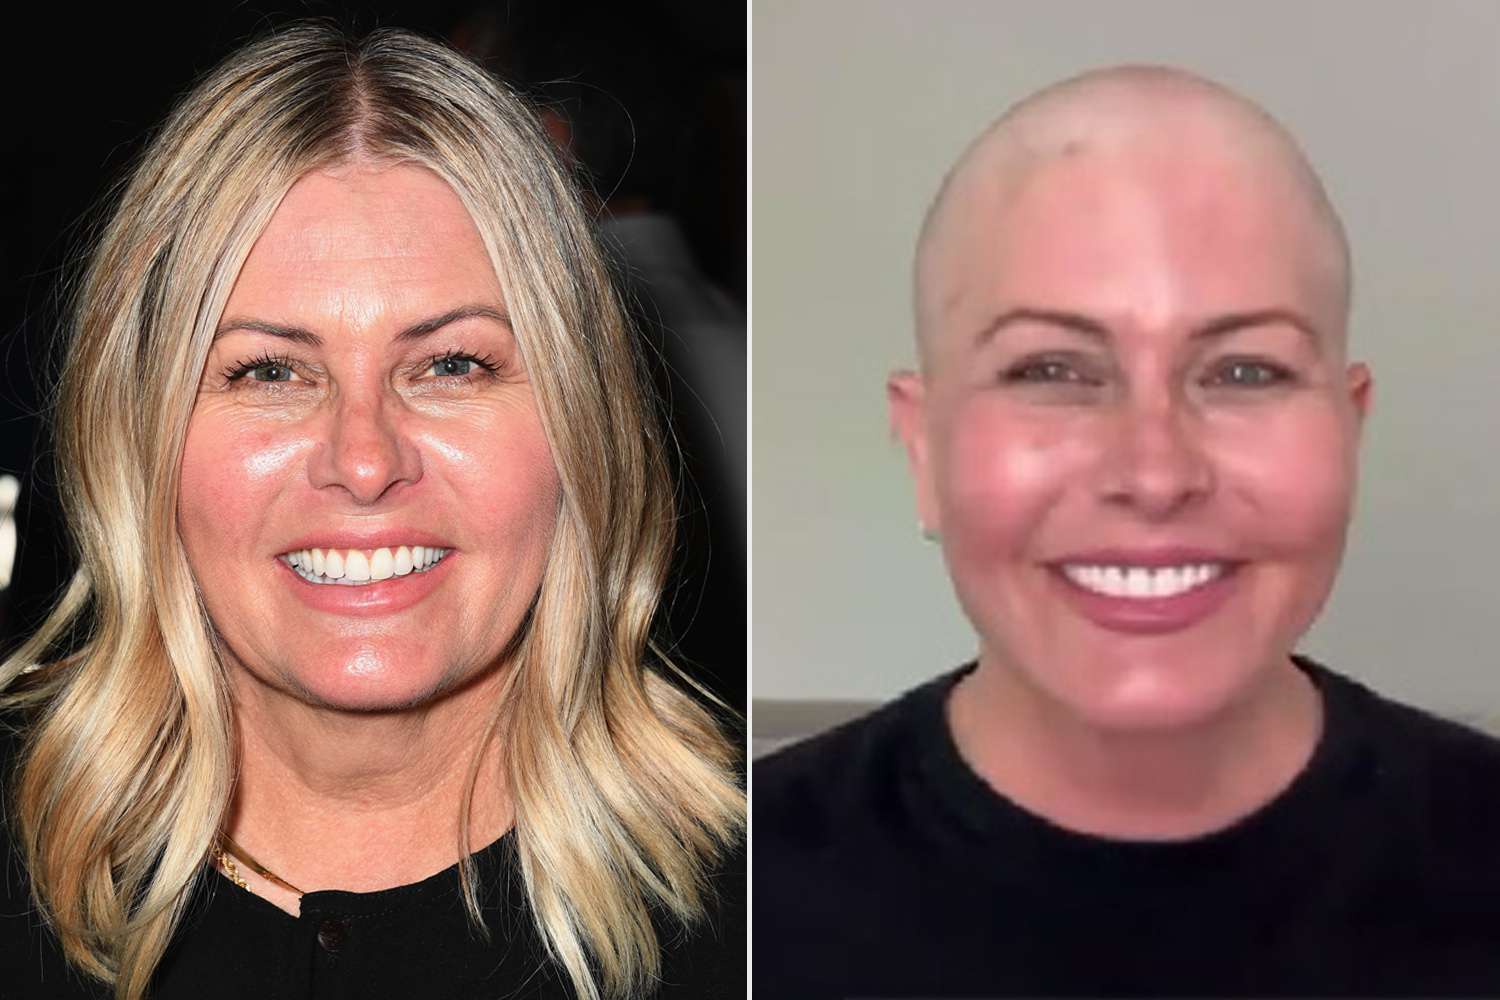 Nicole Eggert Shaves Her Head Following Breast Cancer Diagnosis [Video]